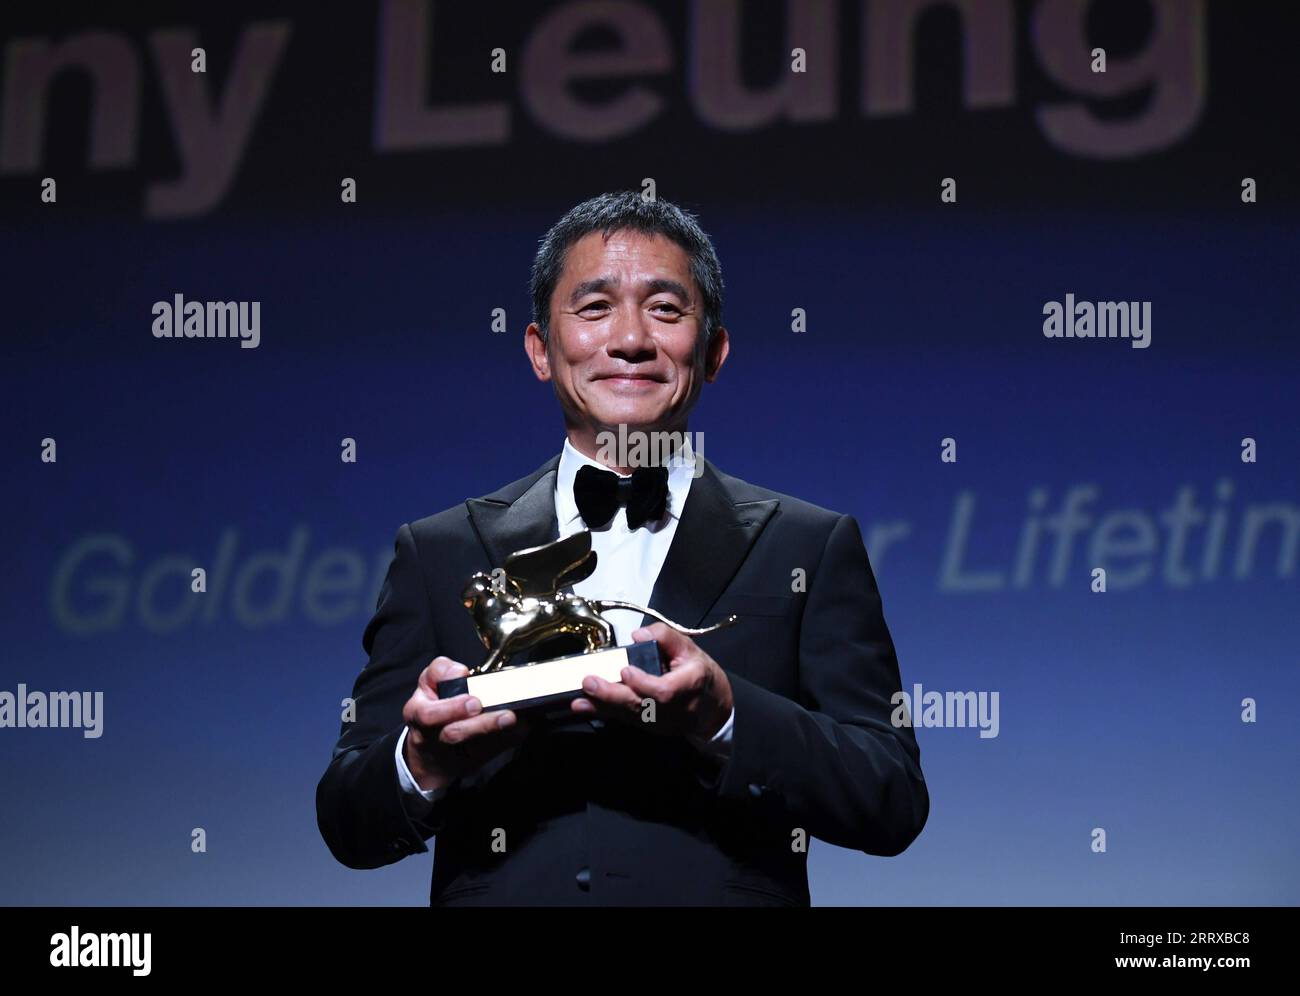 230902 -- VENICE, Sept. 2, 2023 -- Actor Tony Leung Chiu-Wai poses with his trophy at an award ceremony during the 80th Venice International Film Festival in Venice, Italy, on Sept. 2, 2023. Tony Leung Chiu-Wai of Hong Kong, China was presented with the Golden Lion for Lifetime Achievement during the event on Saturday.  ITALY-VENICE-FILM FESTIVAL-TONY LEUNG CHIU-WAI-GOLDEN LION-LIFETIME ACHIEVEMENT JinxMamengni PUBLICATIONxNOTxINxCHN Stock Photo